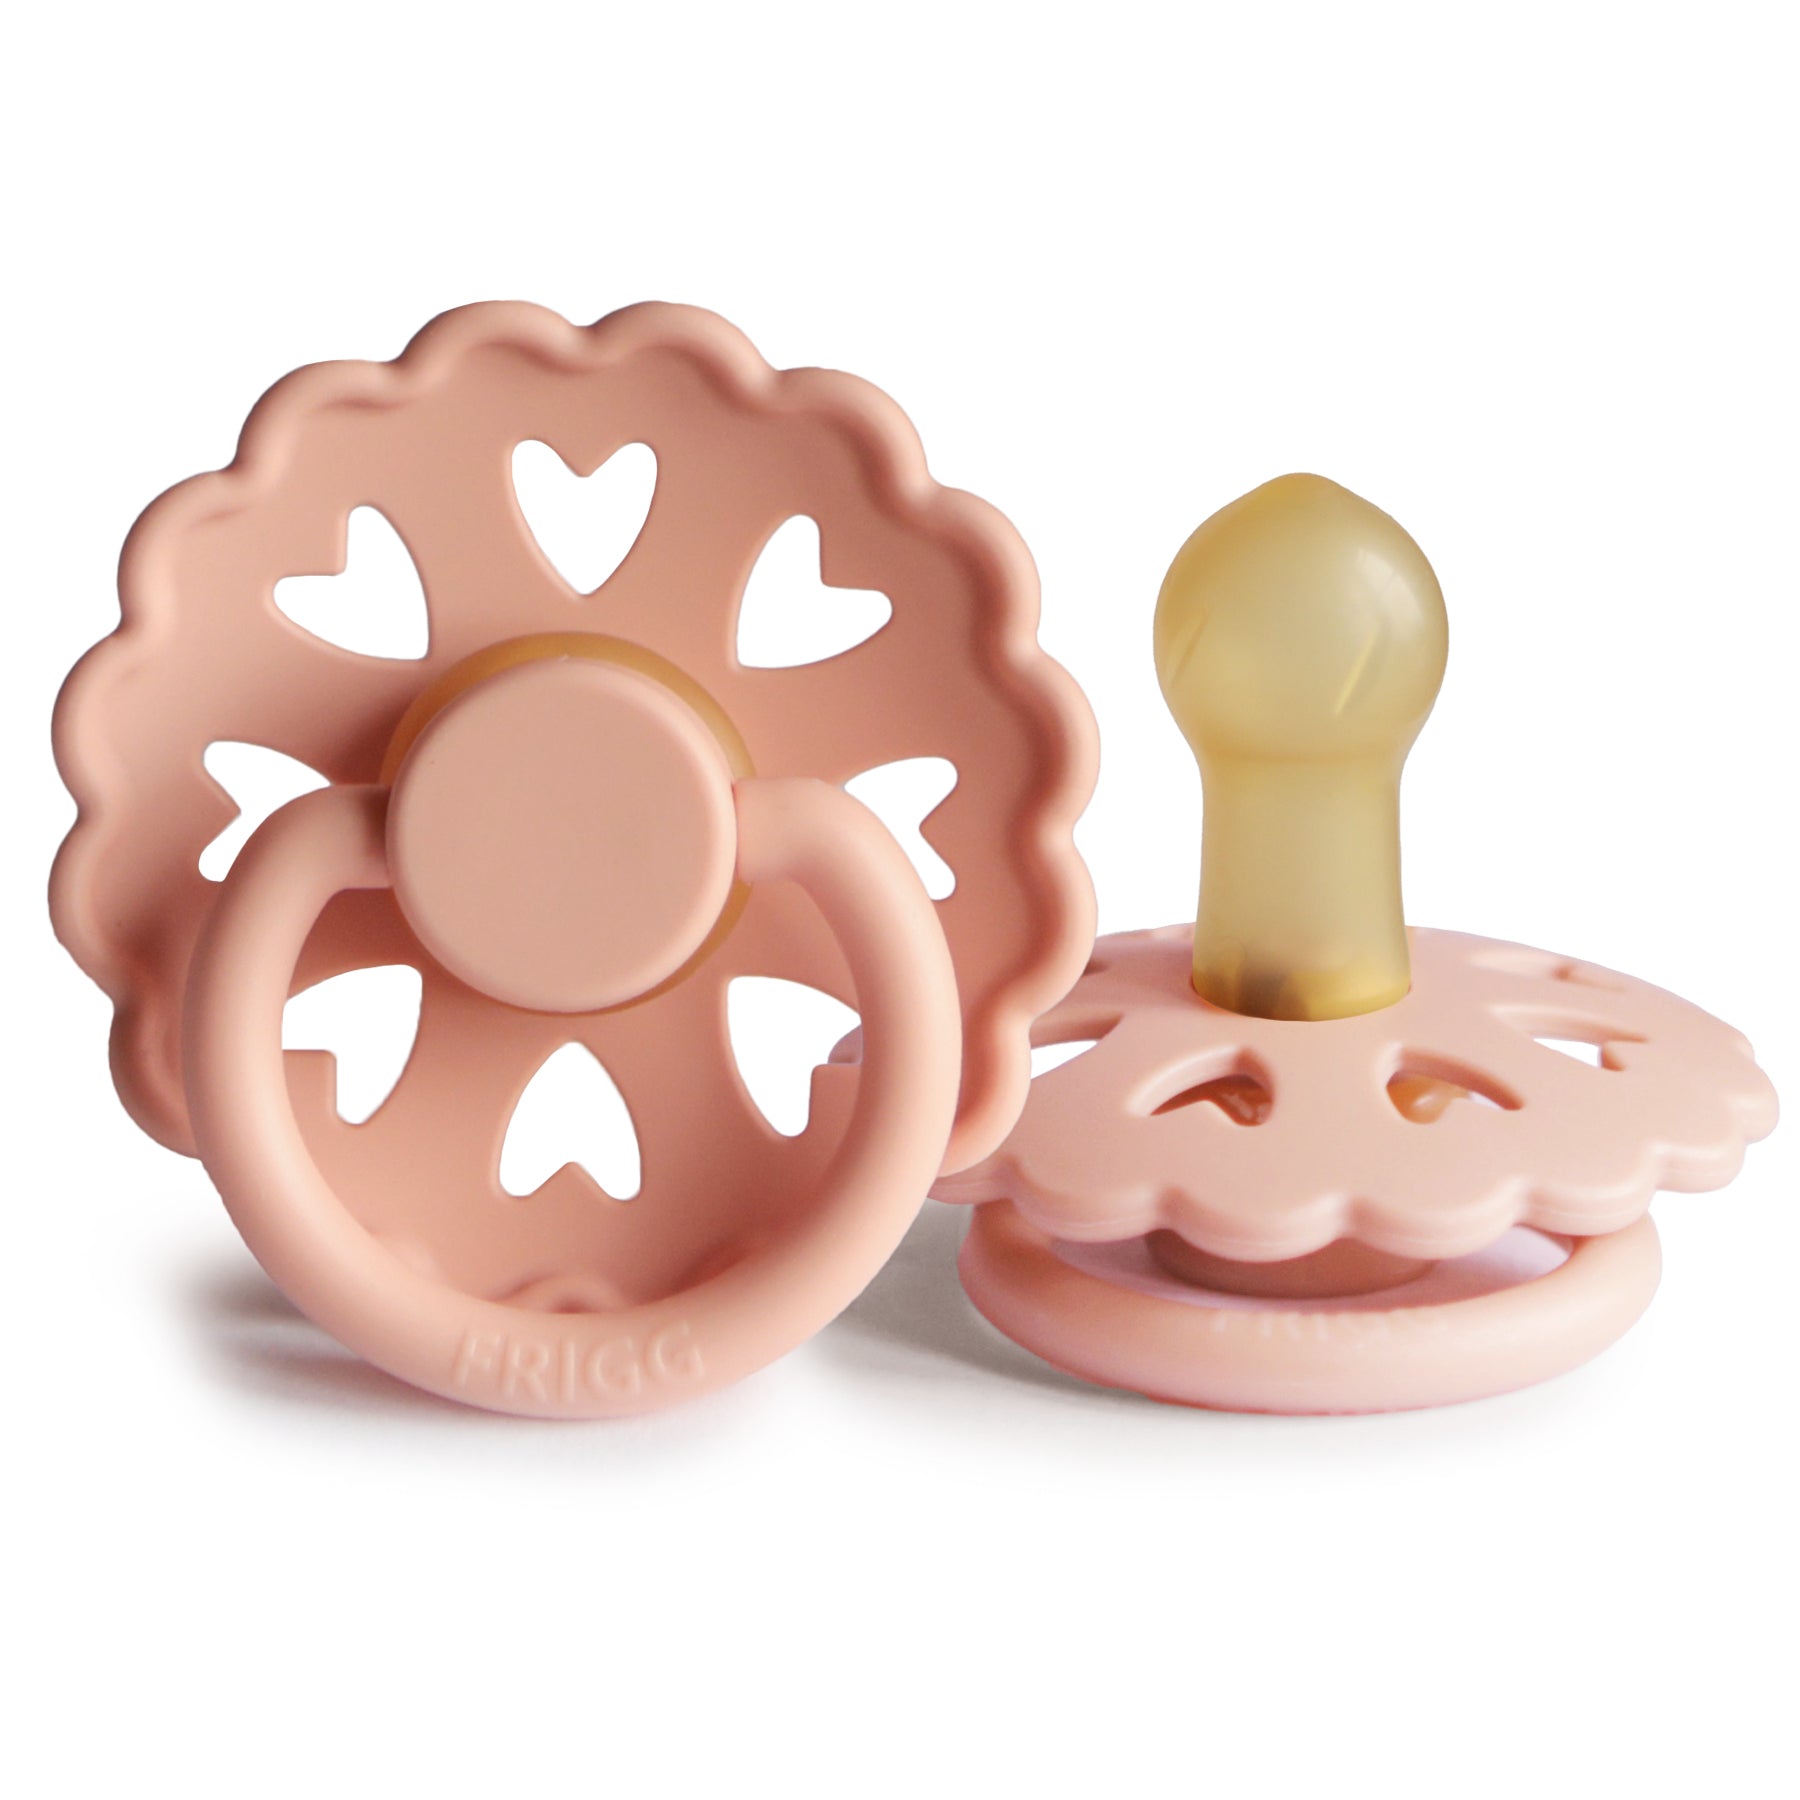 FRIGG Fairytale Latex Pacifier Dummy – The Princess and the Pea